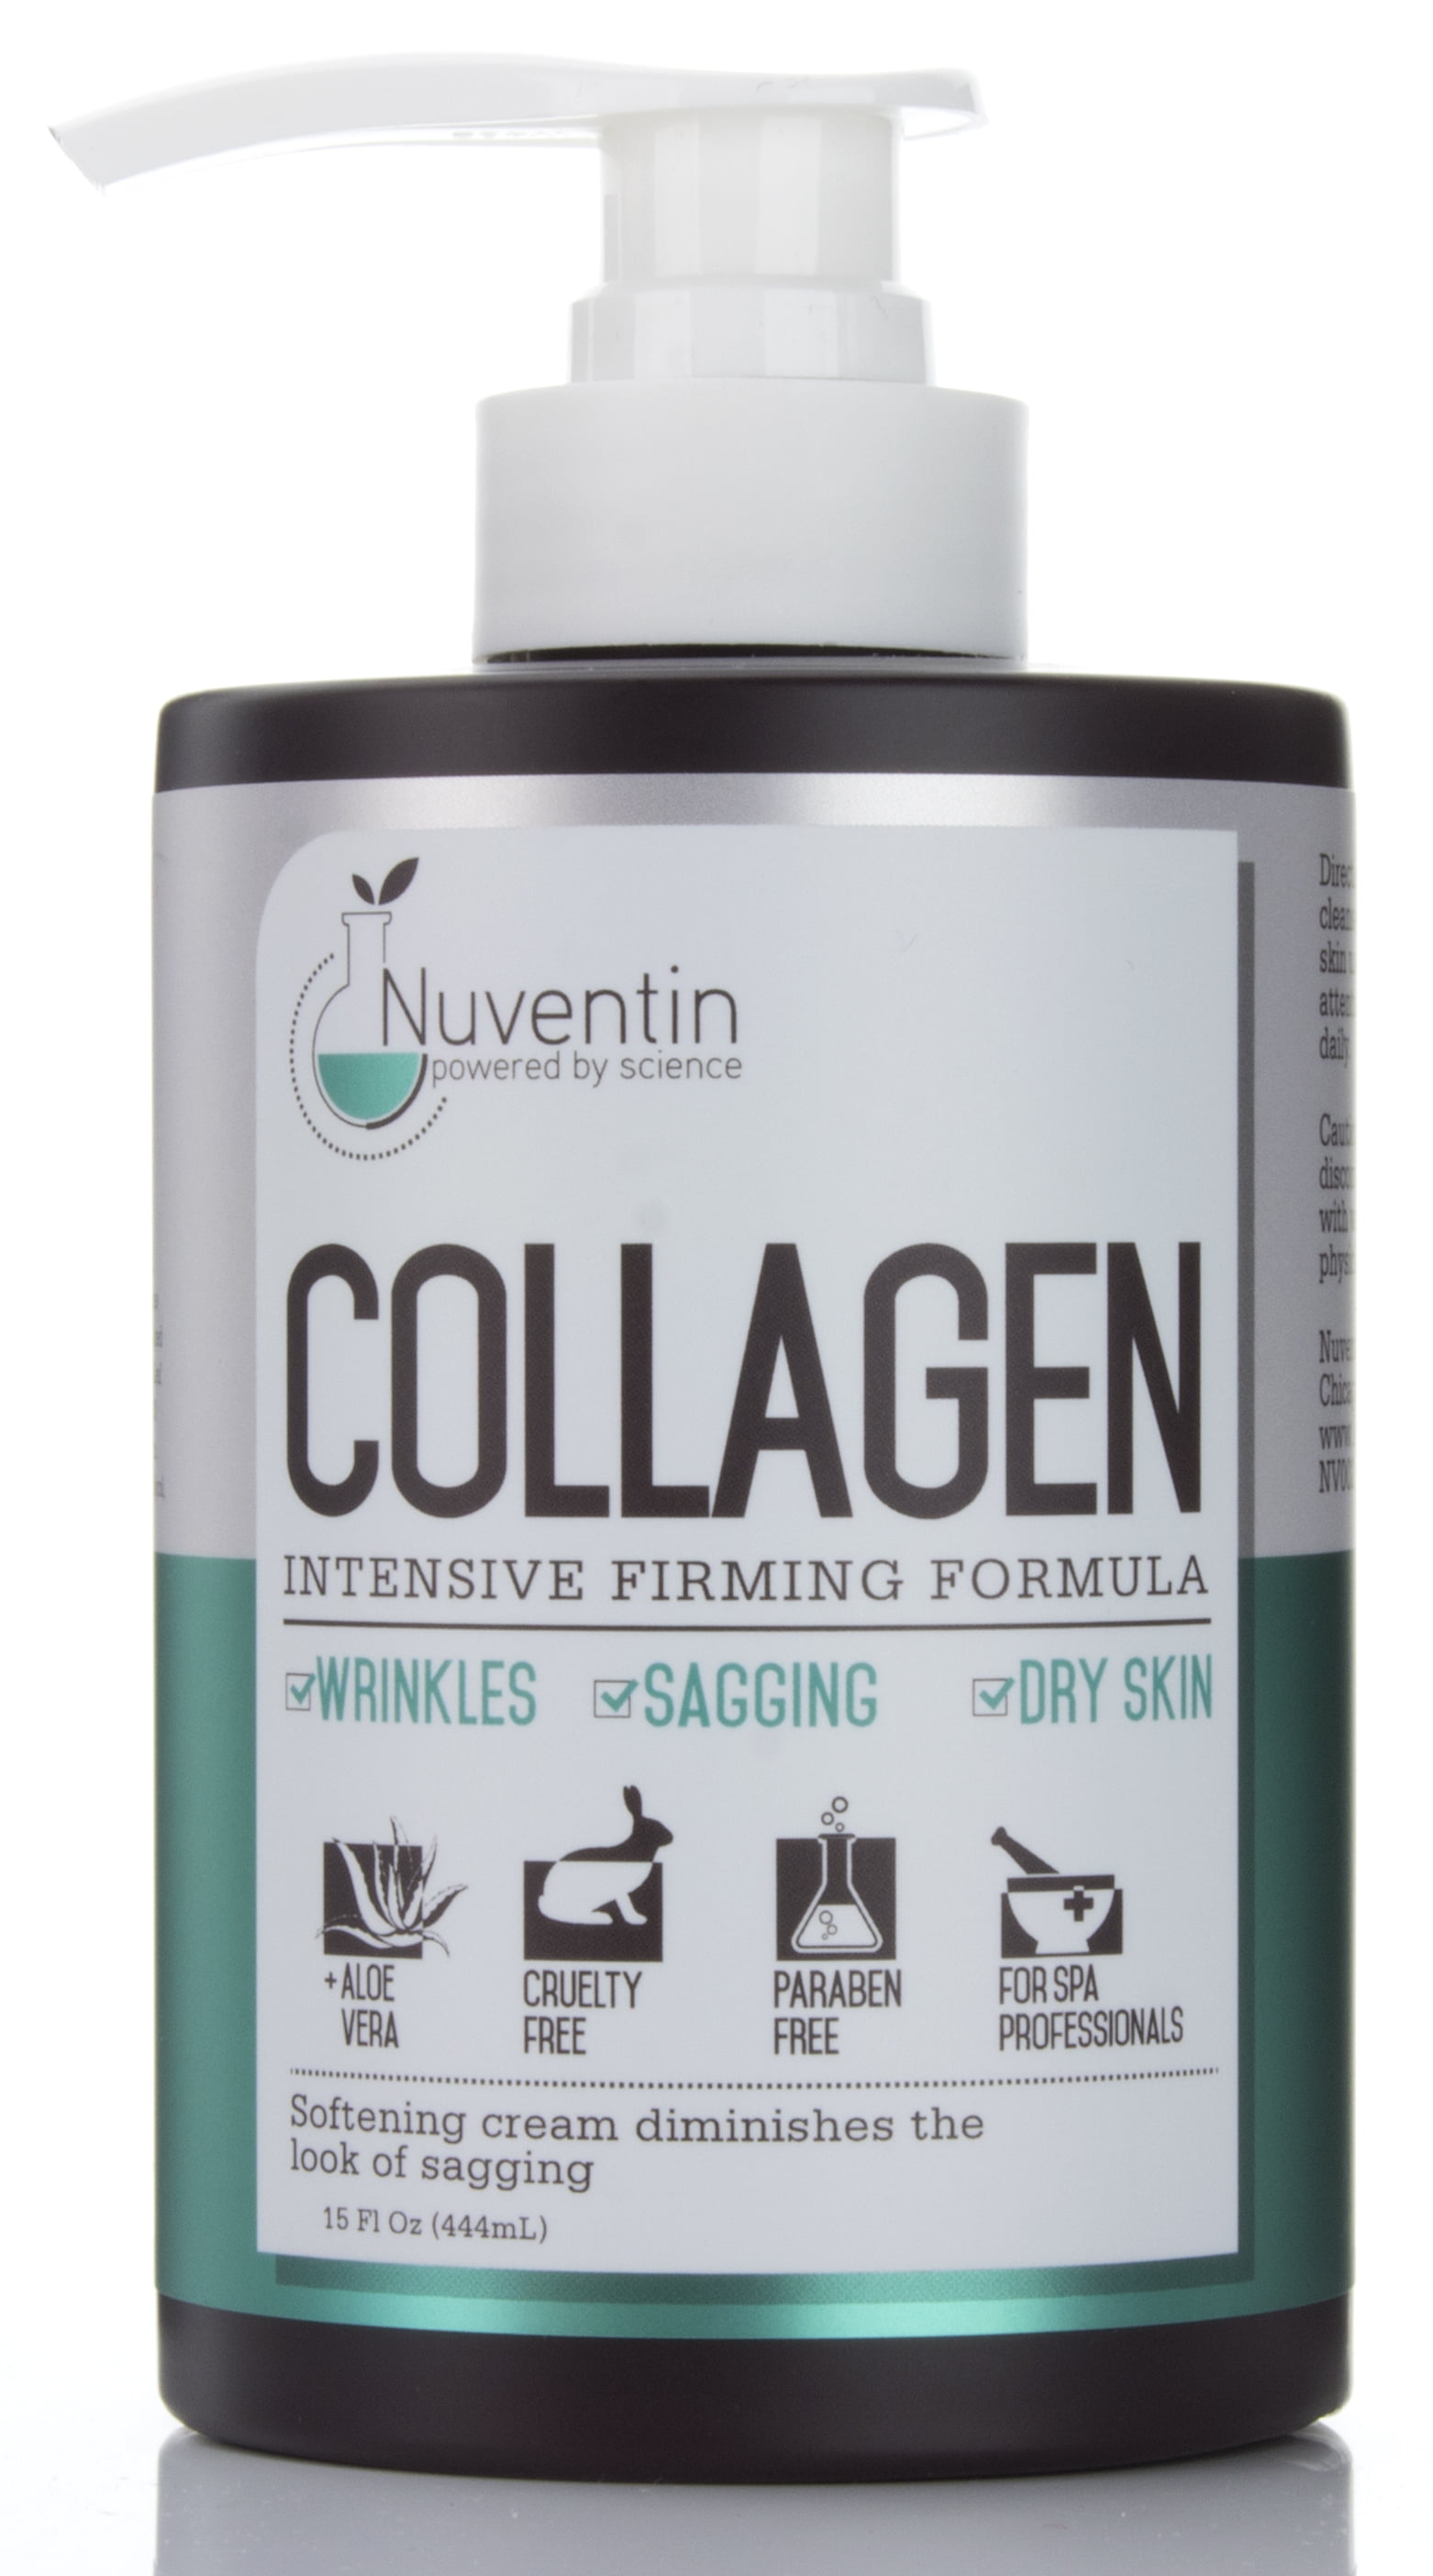 Nuventin Collagen Cream for Wrinkles, Sagging Skin, and Dry Skin